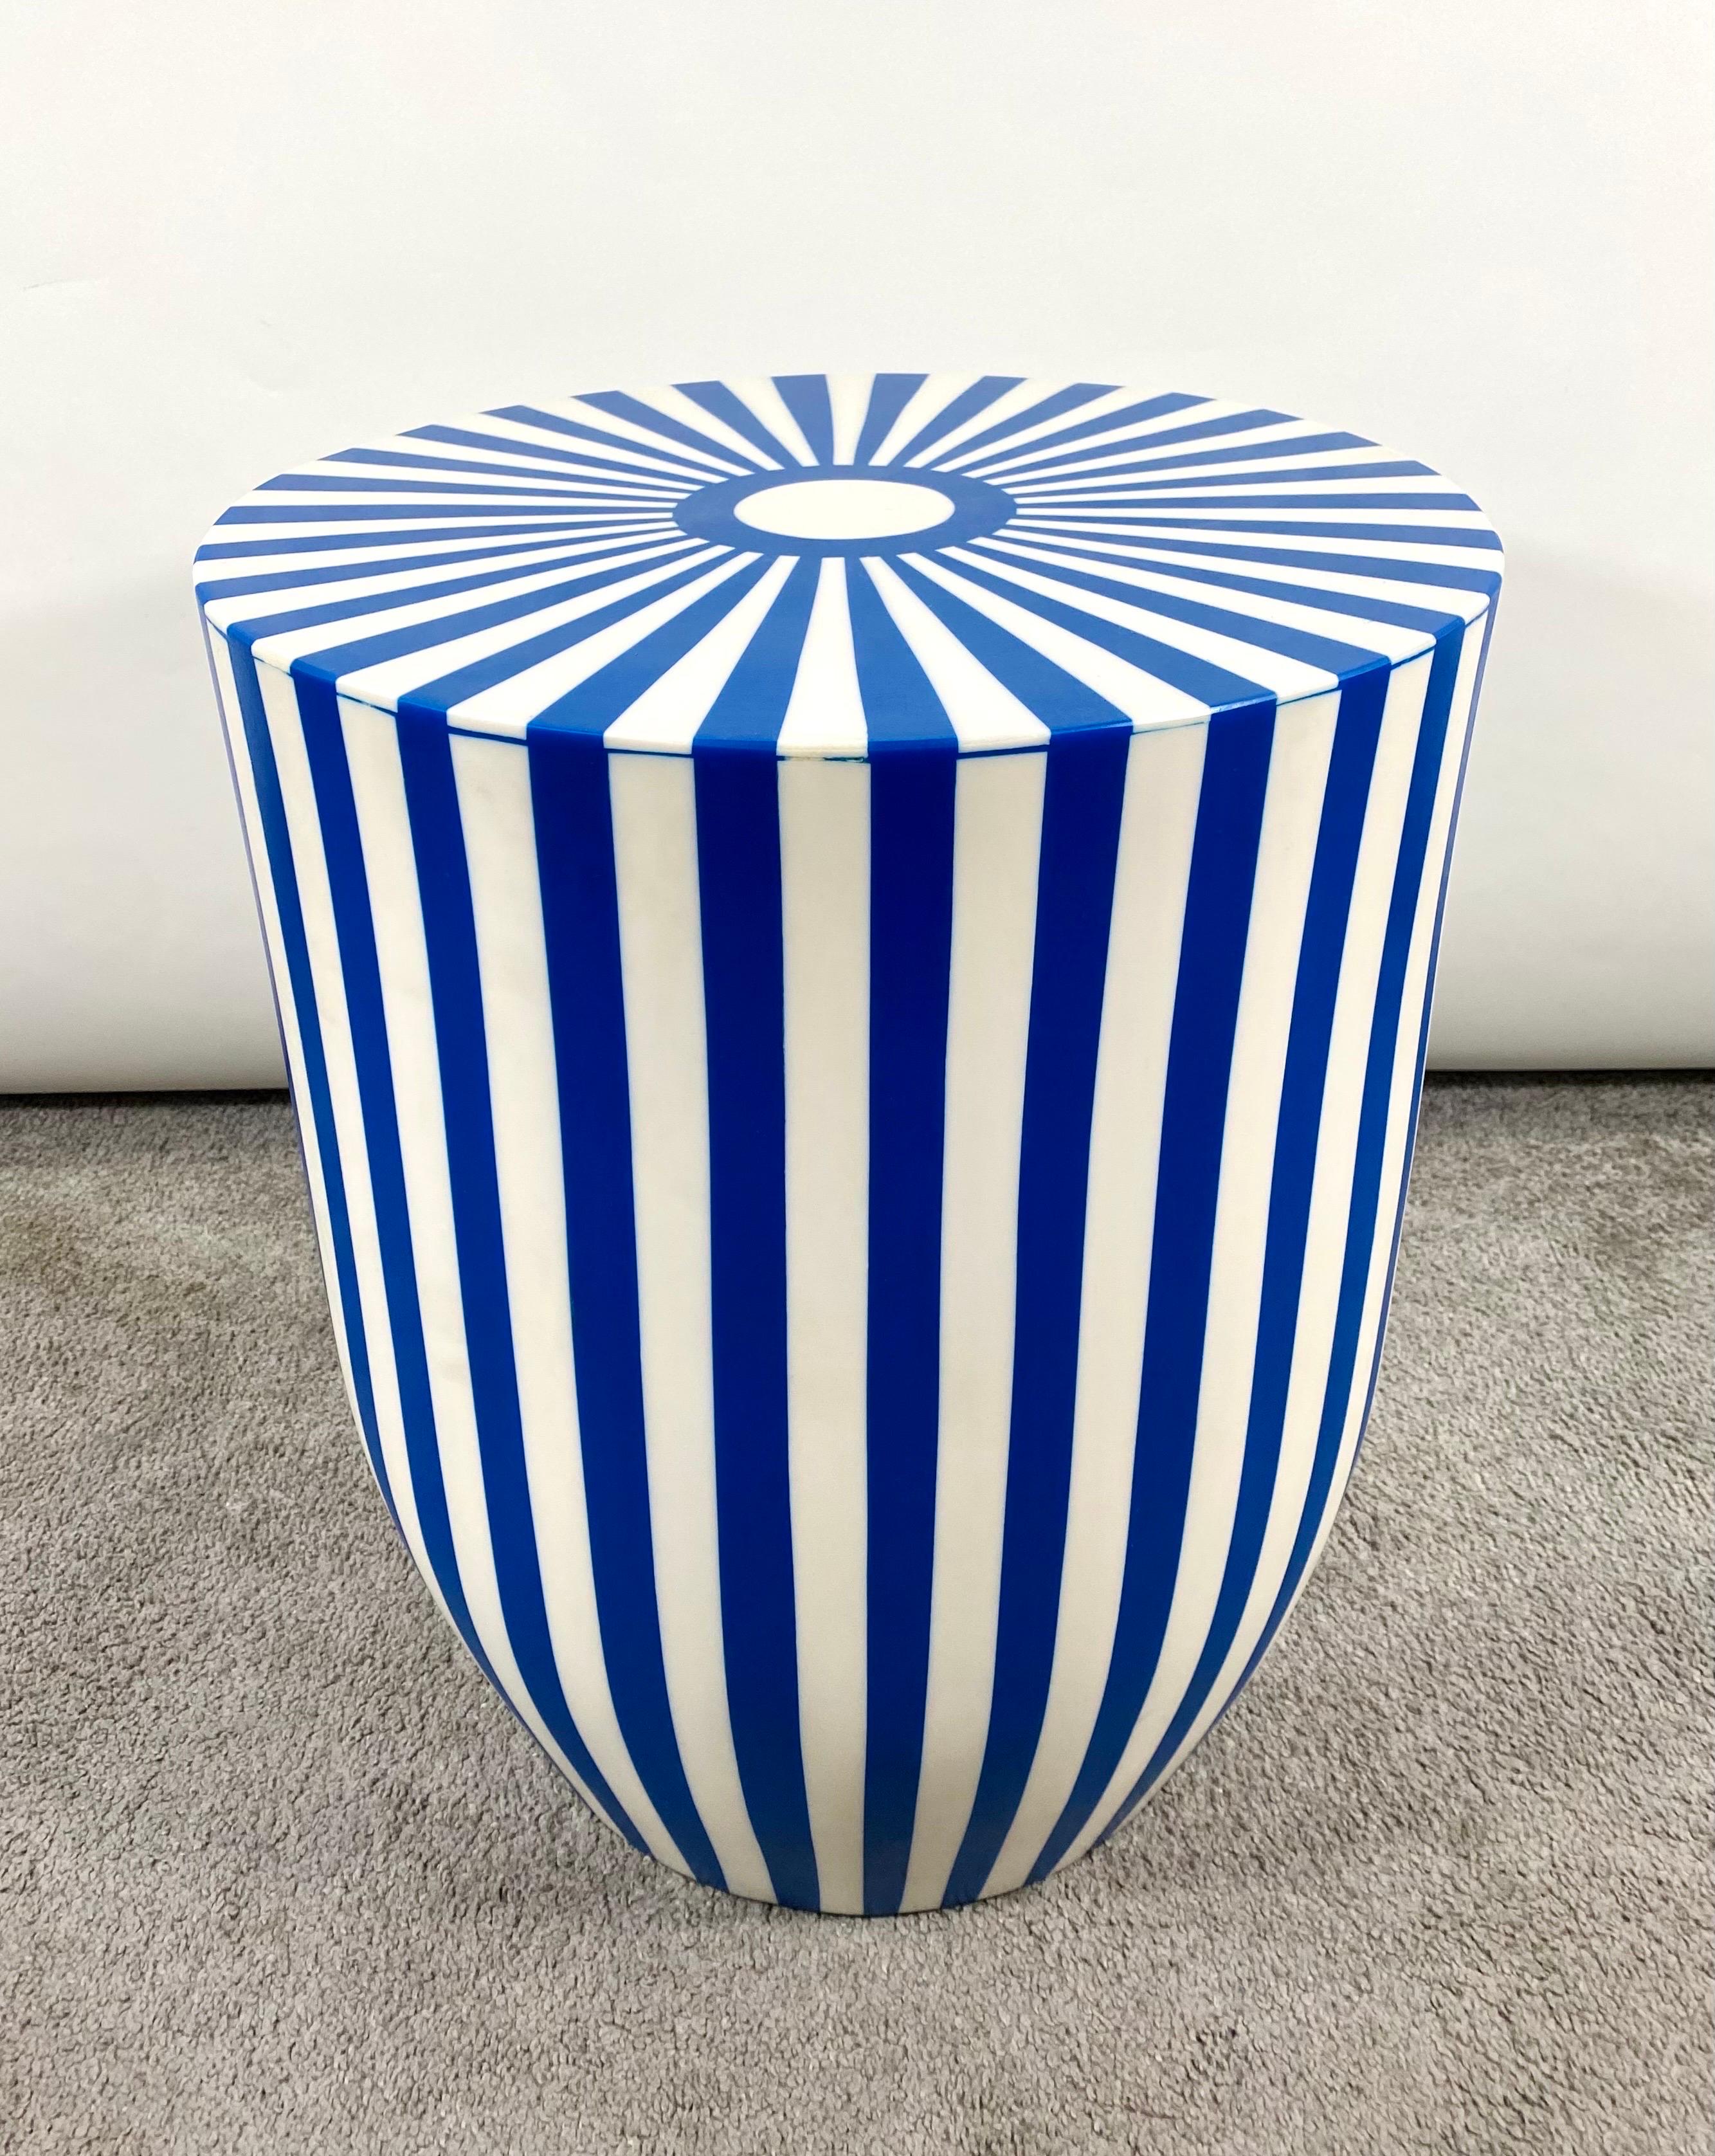 Art Deco Style Blue & White Resin Cylindrical Side / End Table or Stool, a Pair For Sale 4